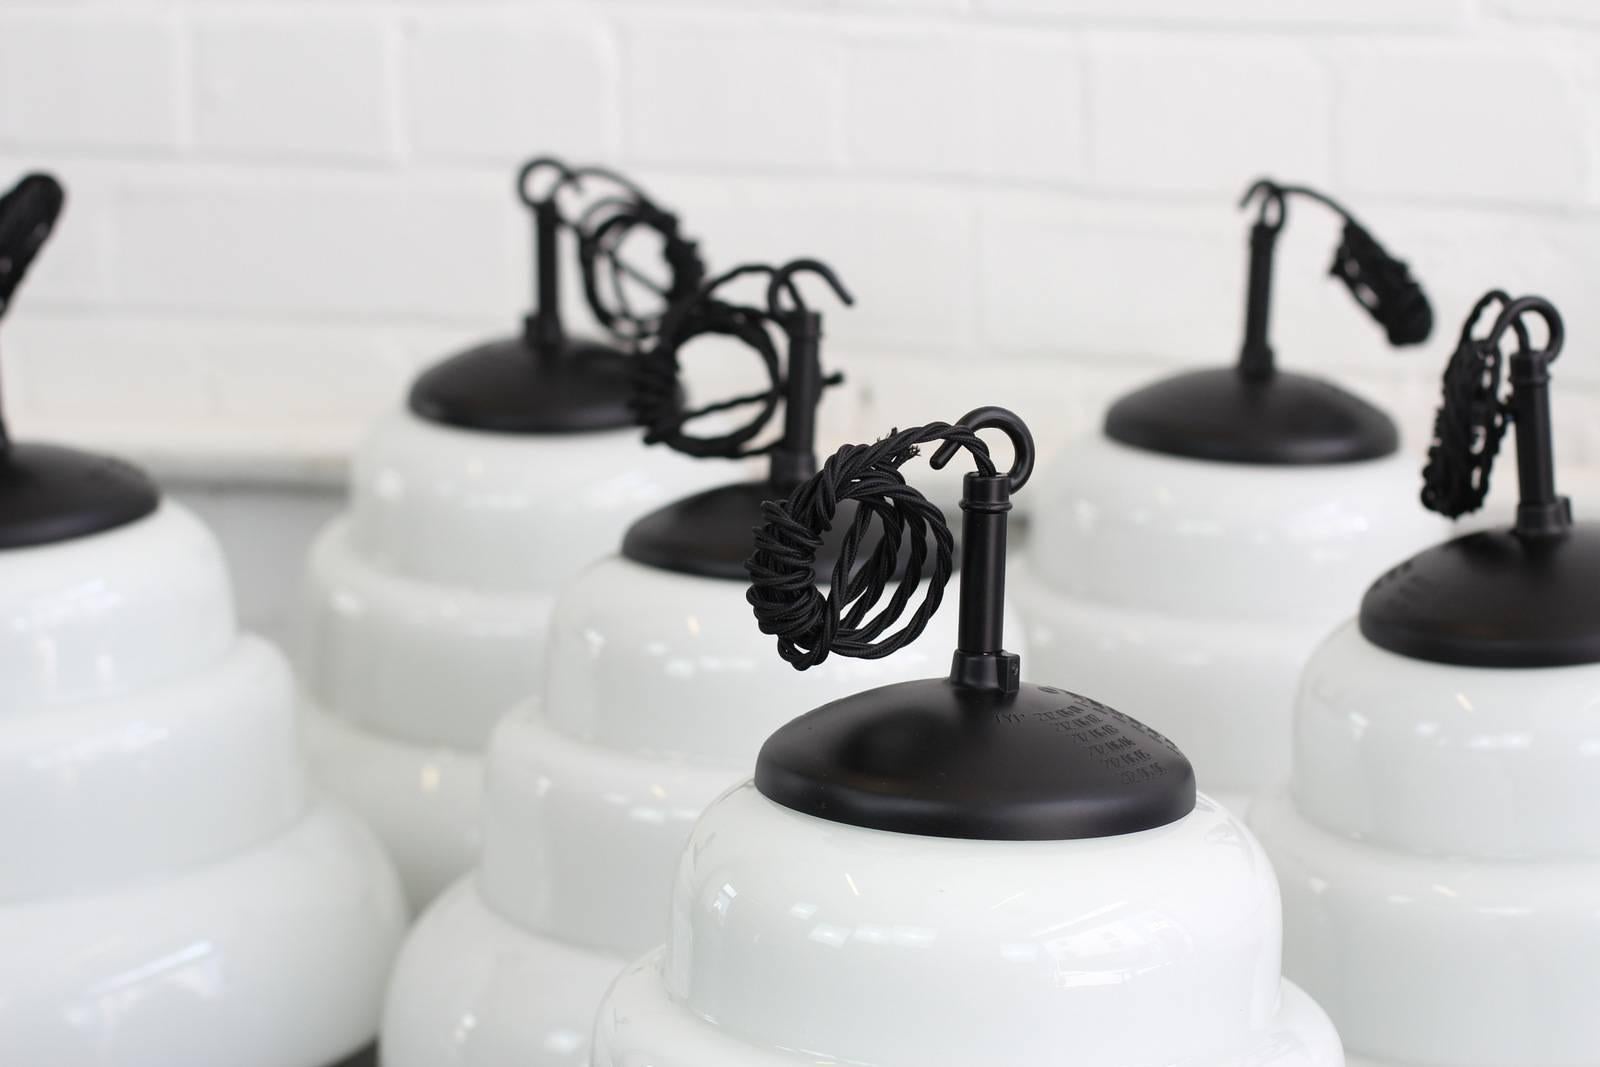 Czech Art Deco opaline pendant lights, circa 1940s

- Price is per light (Seven available)
- Beautiful stepped design
- Black bakelite tops
- Takes E27 fitting bulbs
- Comes with 100 cm of black braided cable
- Czech, circa 1940s
- Measures: